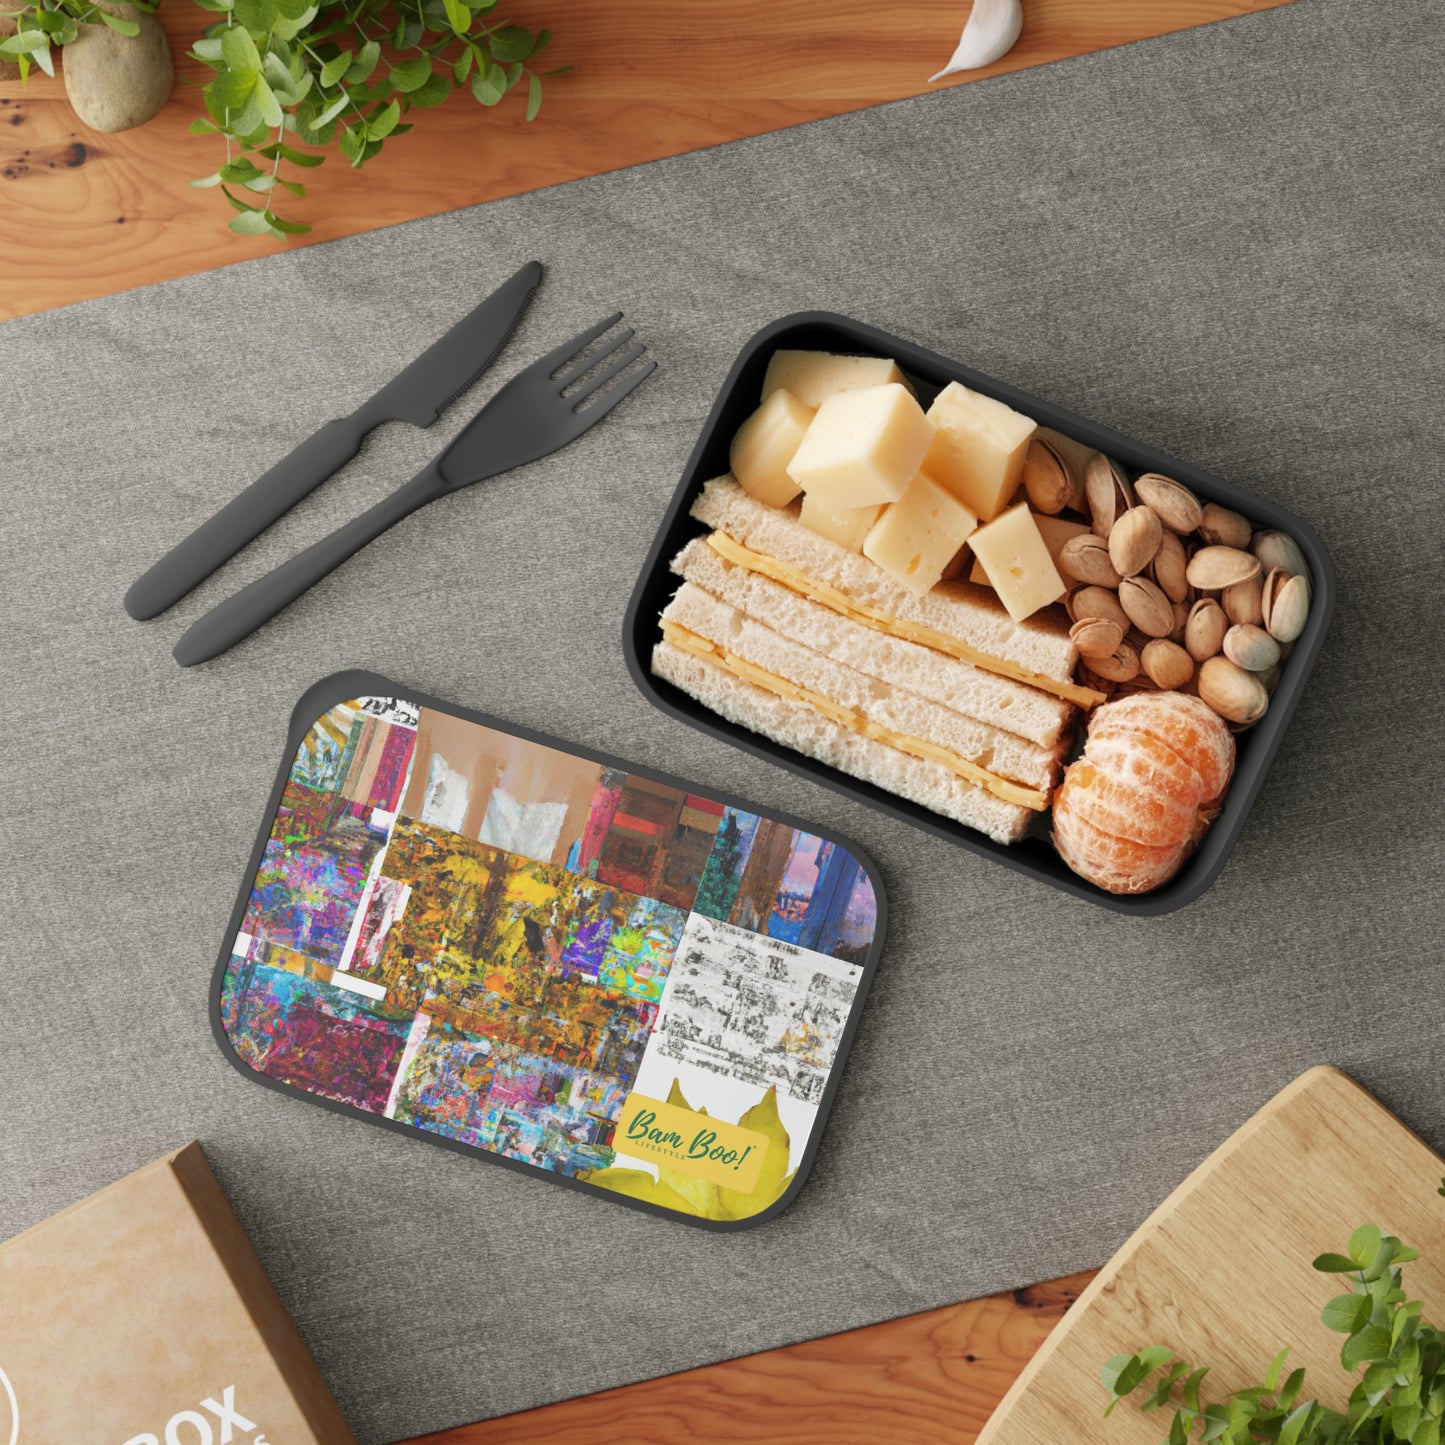 "Exploring Unity in Diversity: A Mixed Media Collage" - Bam Boo! Lifestyle Eco-friendly PLA Bento Box with Band and Utensils